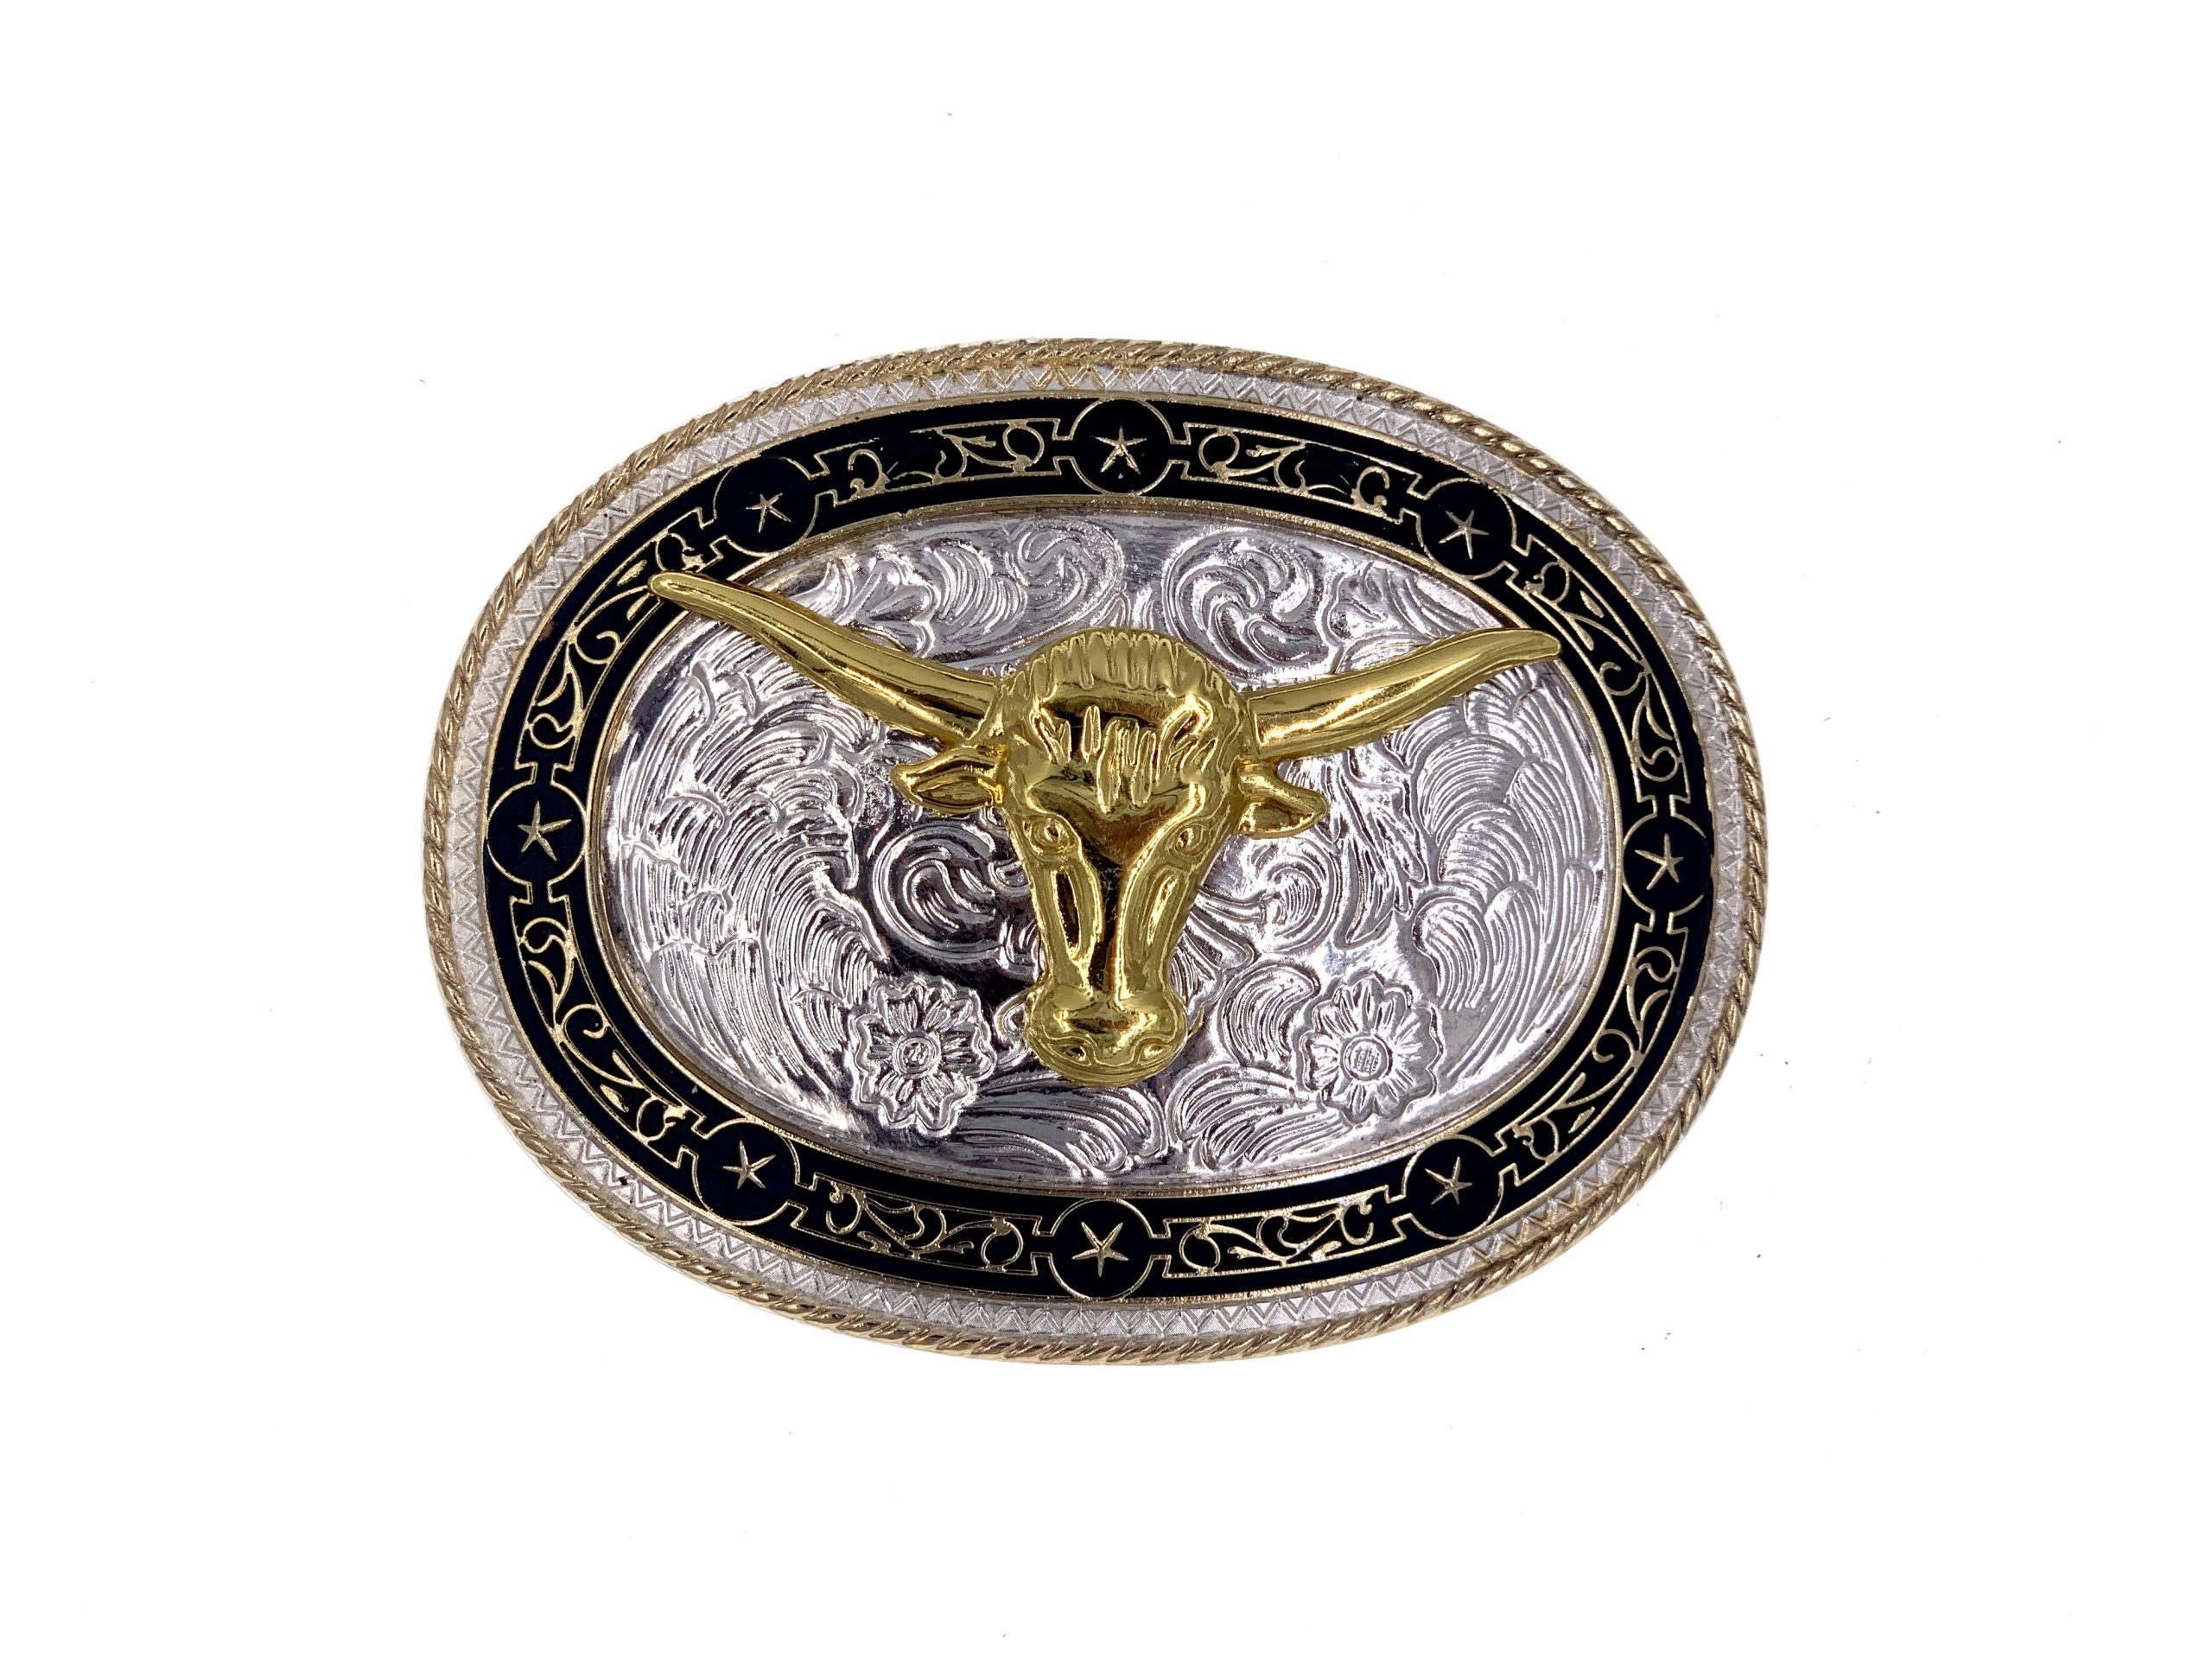 Rodeo style Belt buckle - LCS Fashion